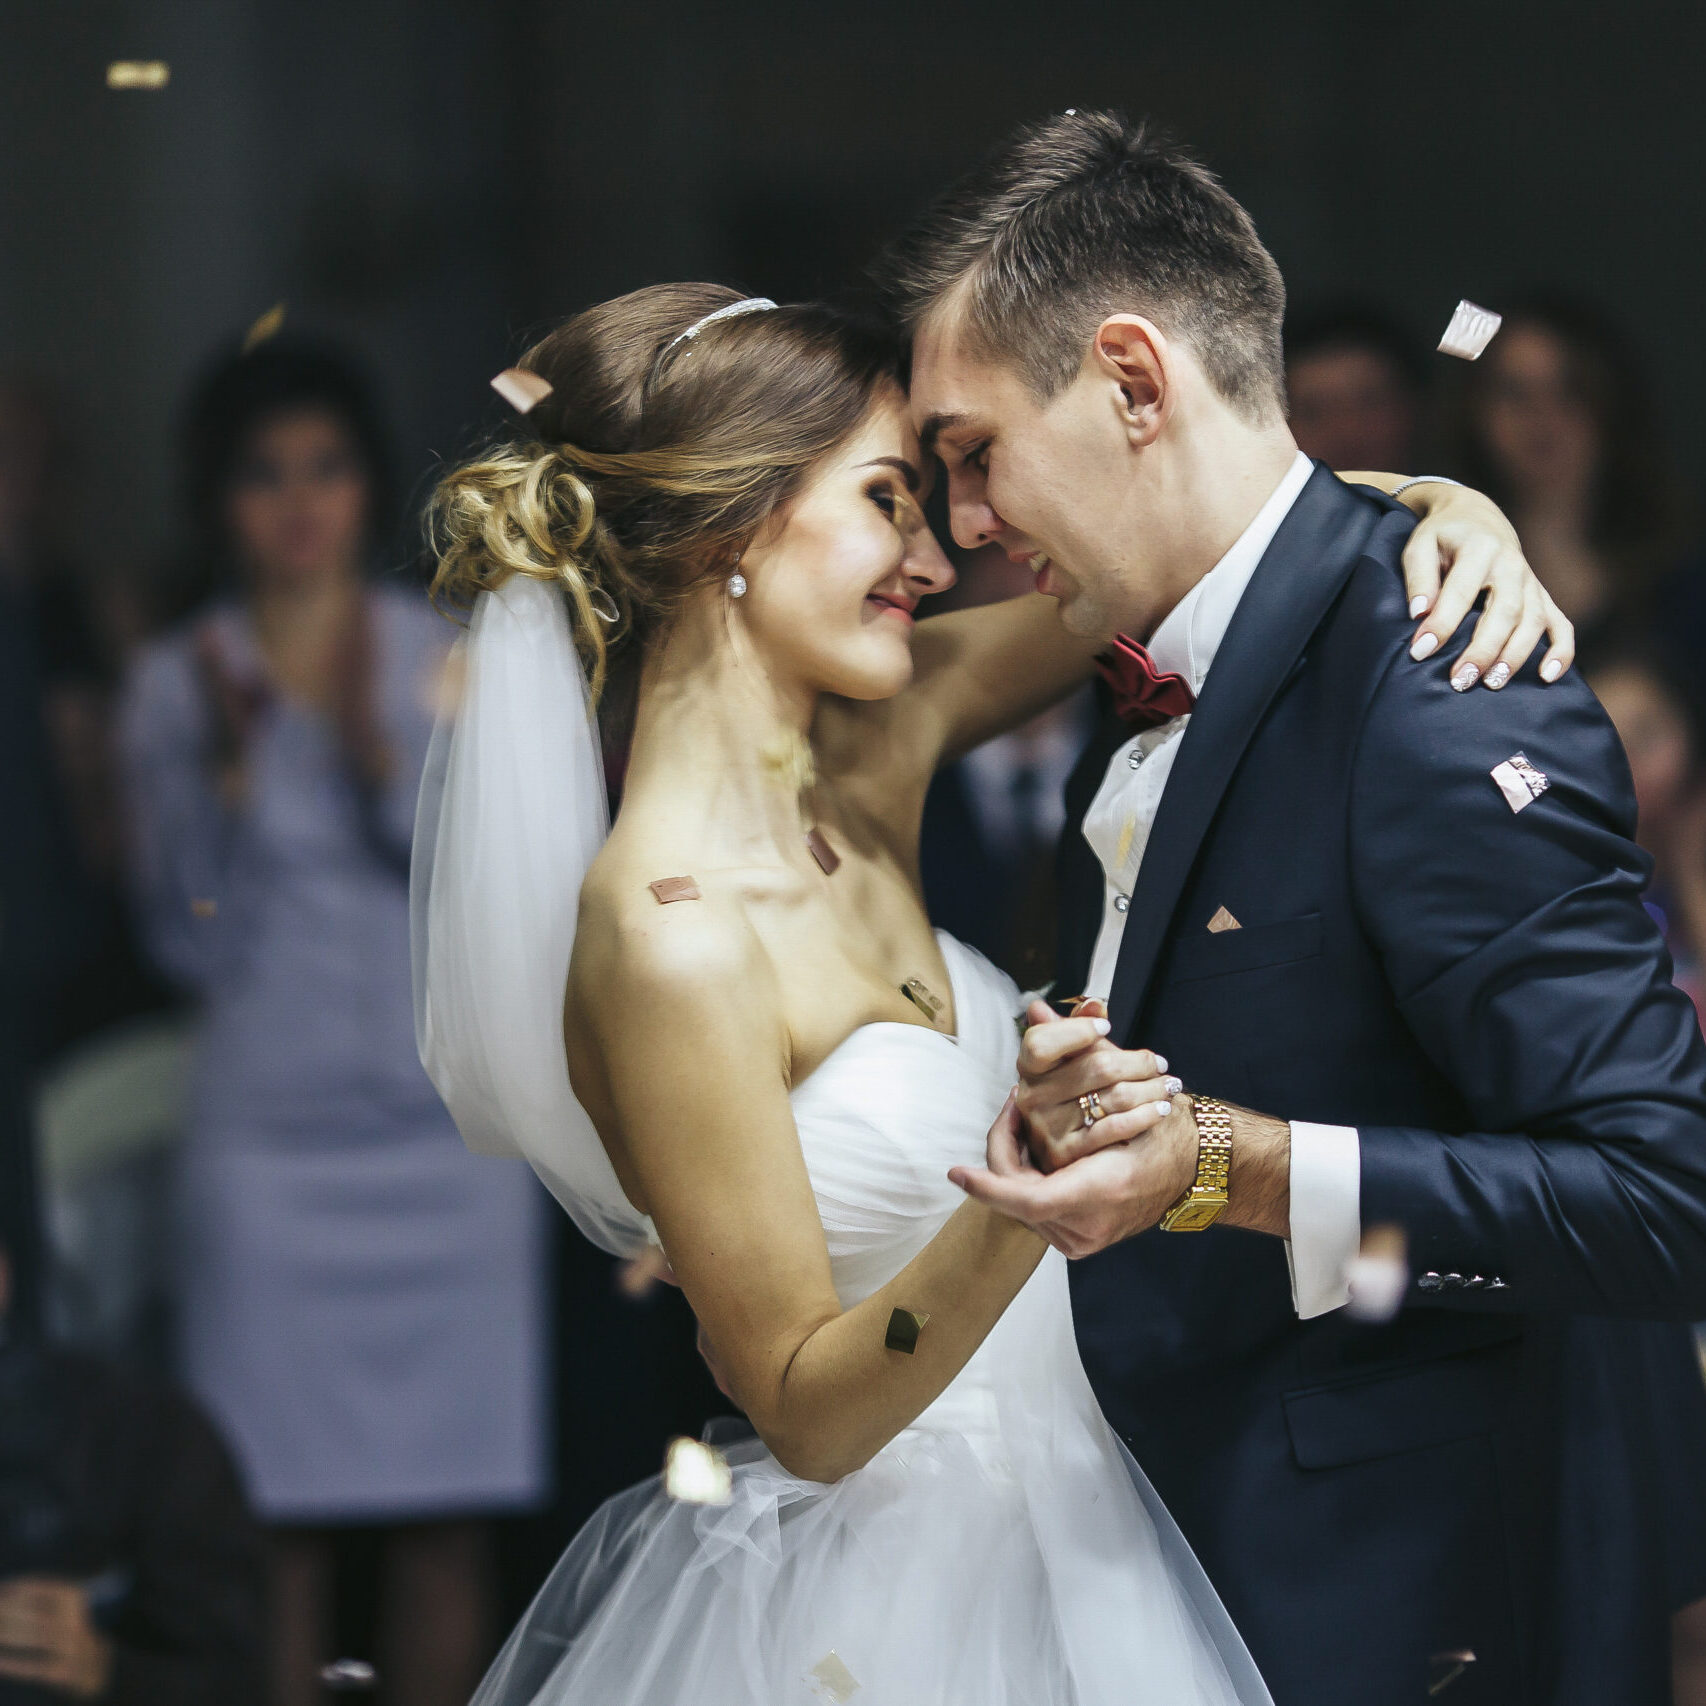 Just married looks romantically while dancing